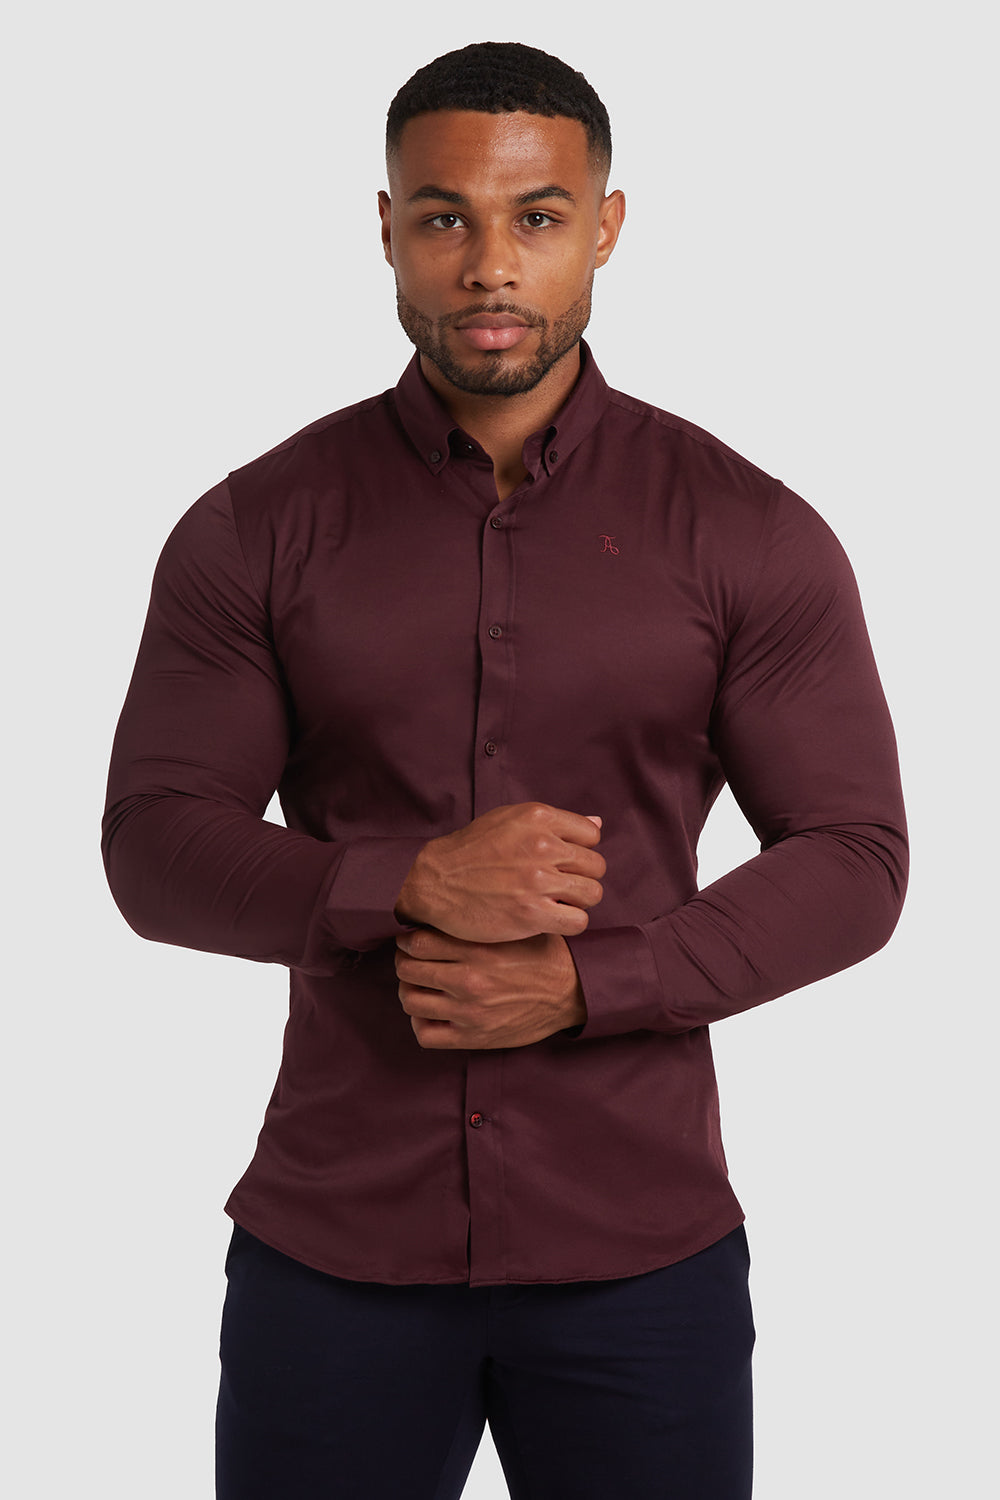 Fit ATHLETE USA - Signature - Shirt Burgundy 2.0 Muscle in TAILORED